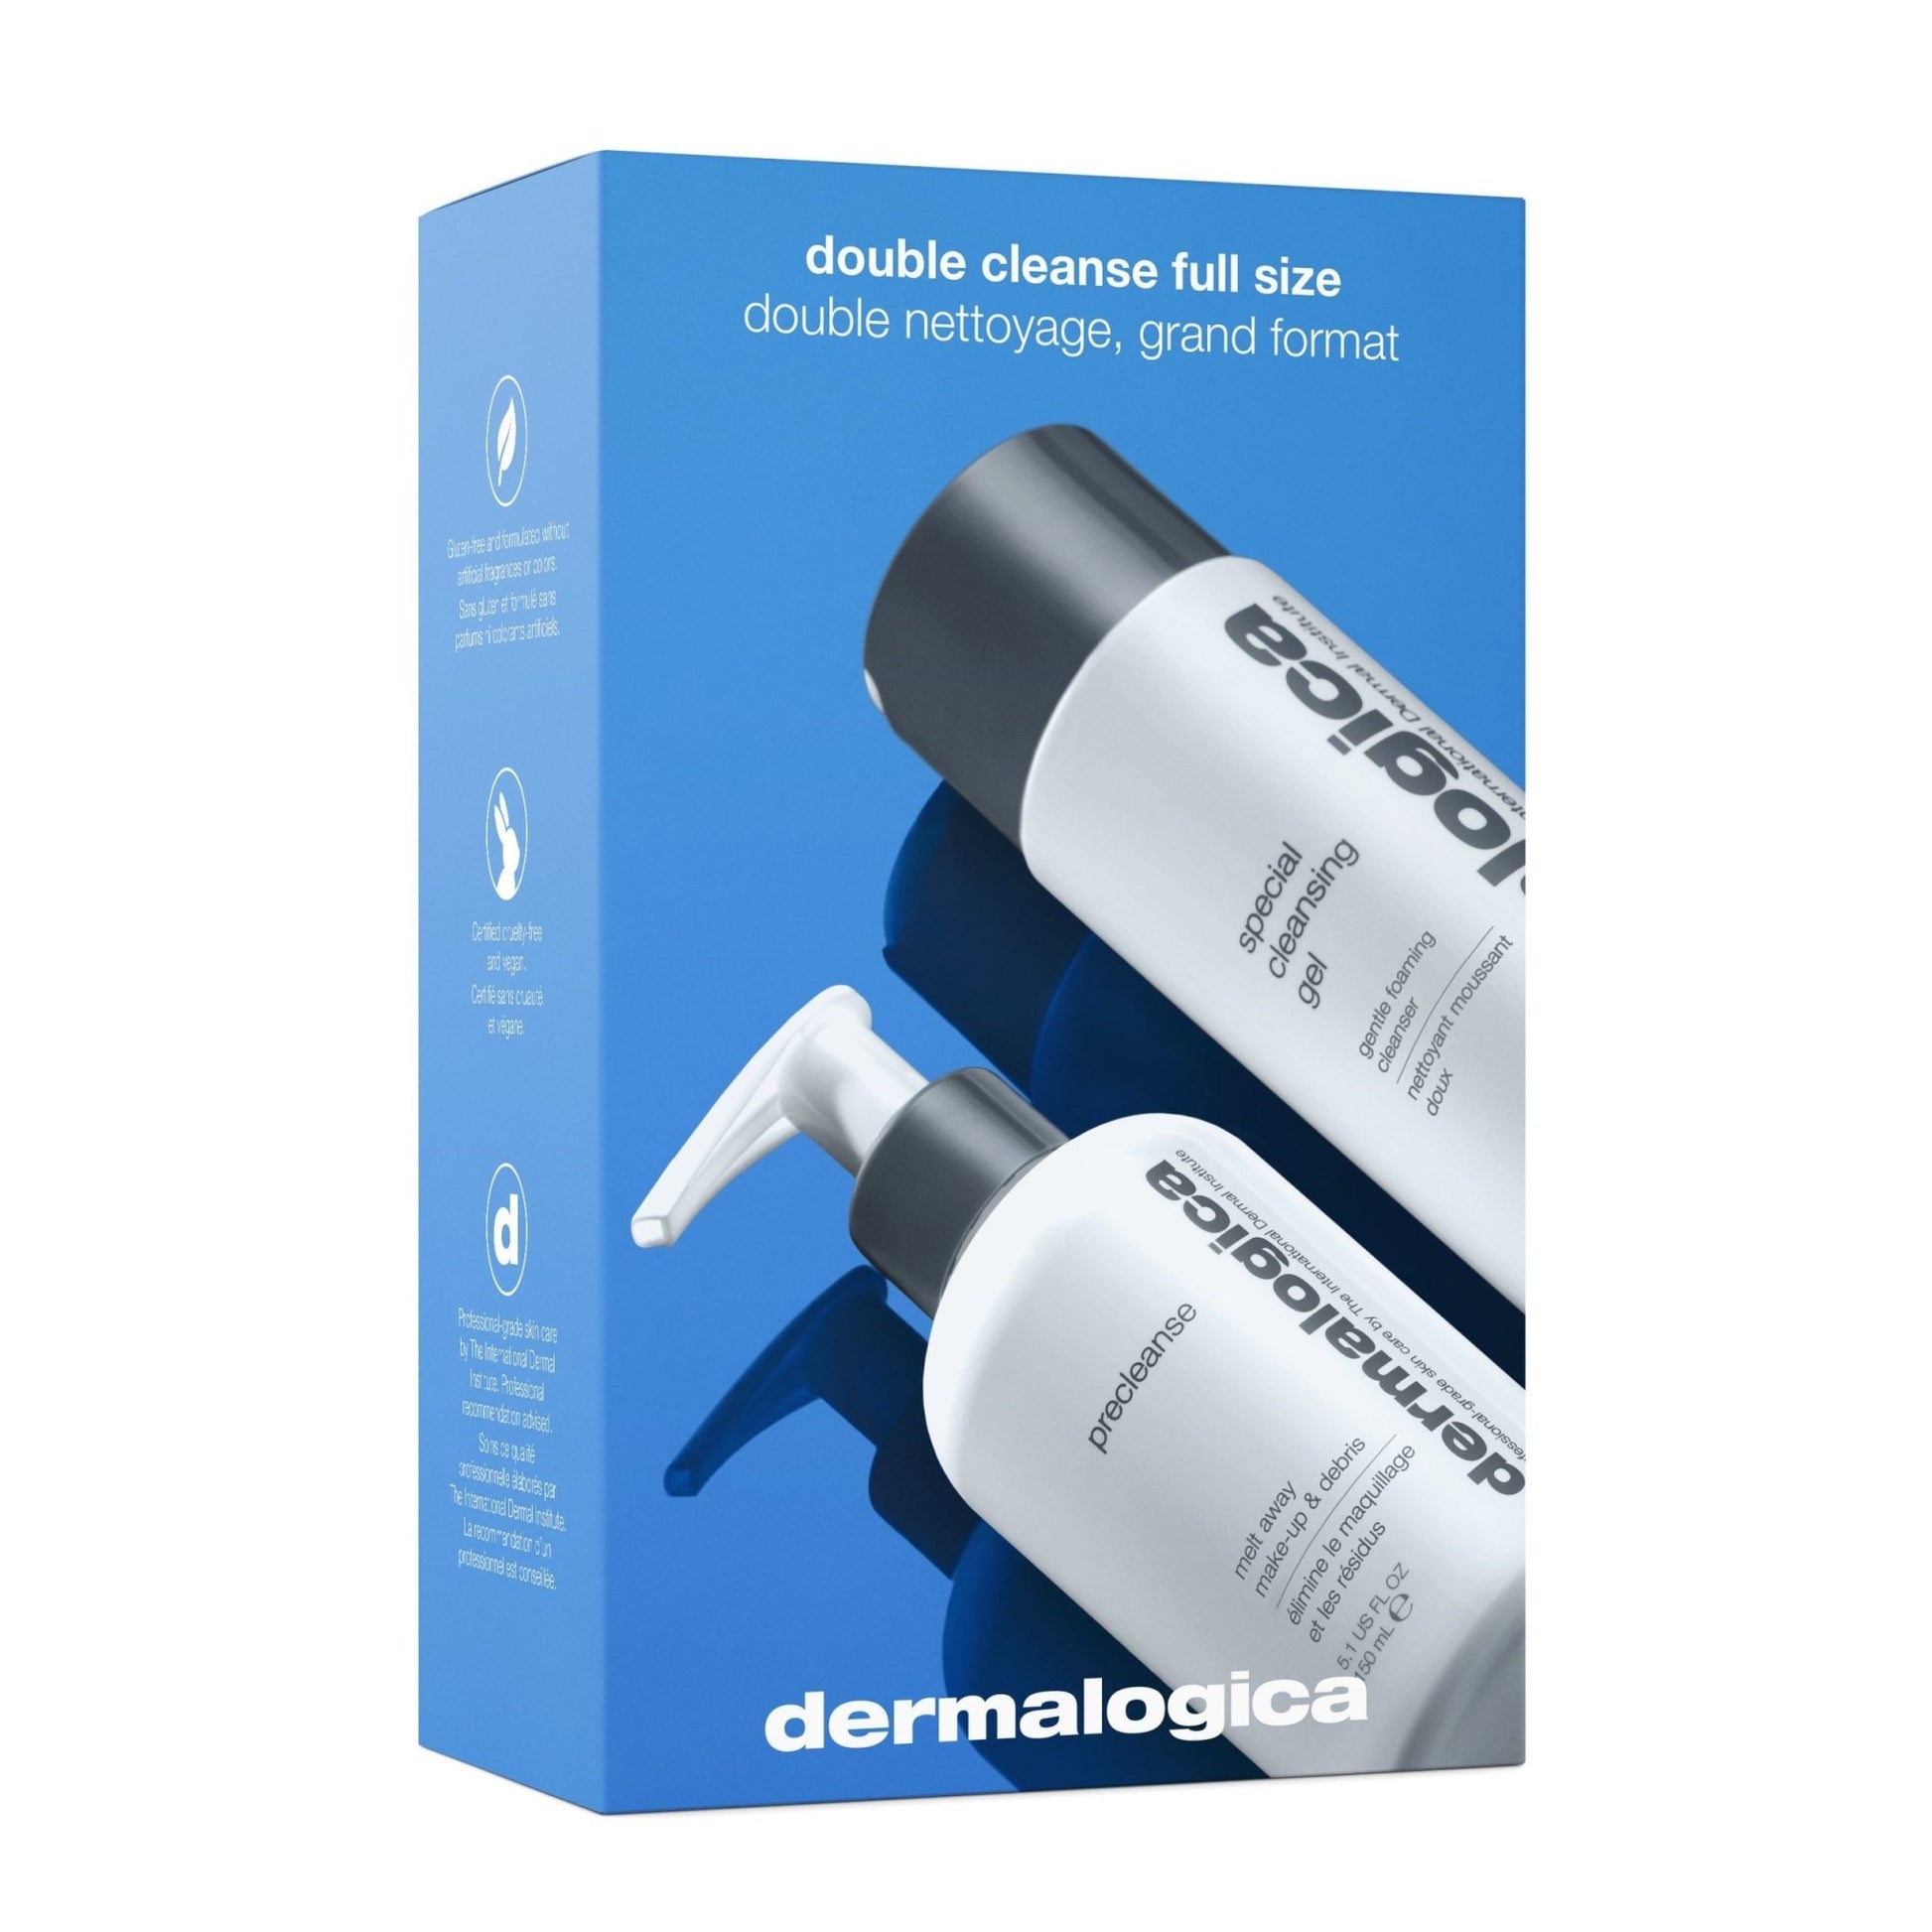 Double cleanse full size Kit - Heaven Therapy Skincare (7597693141152)